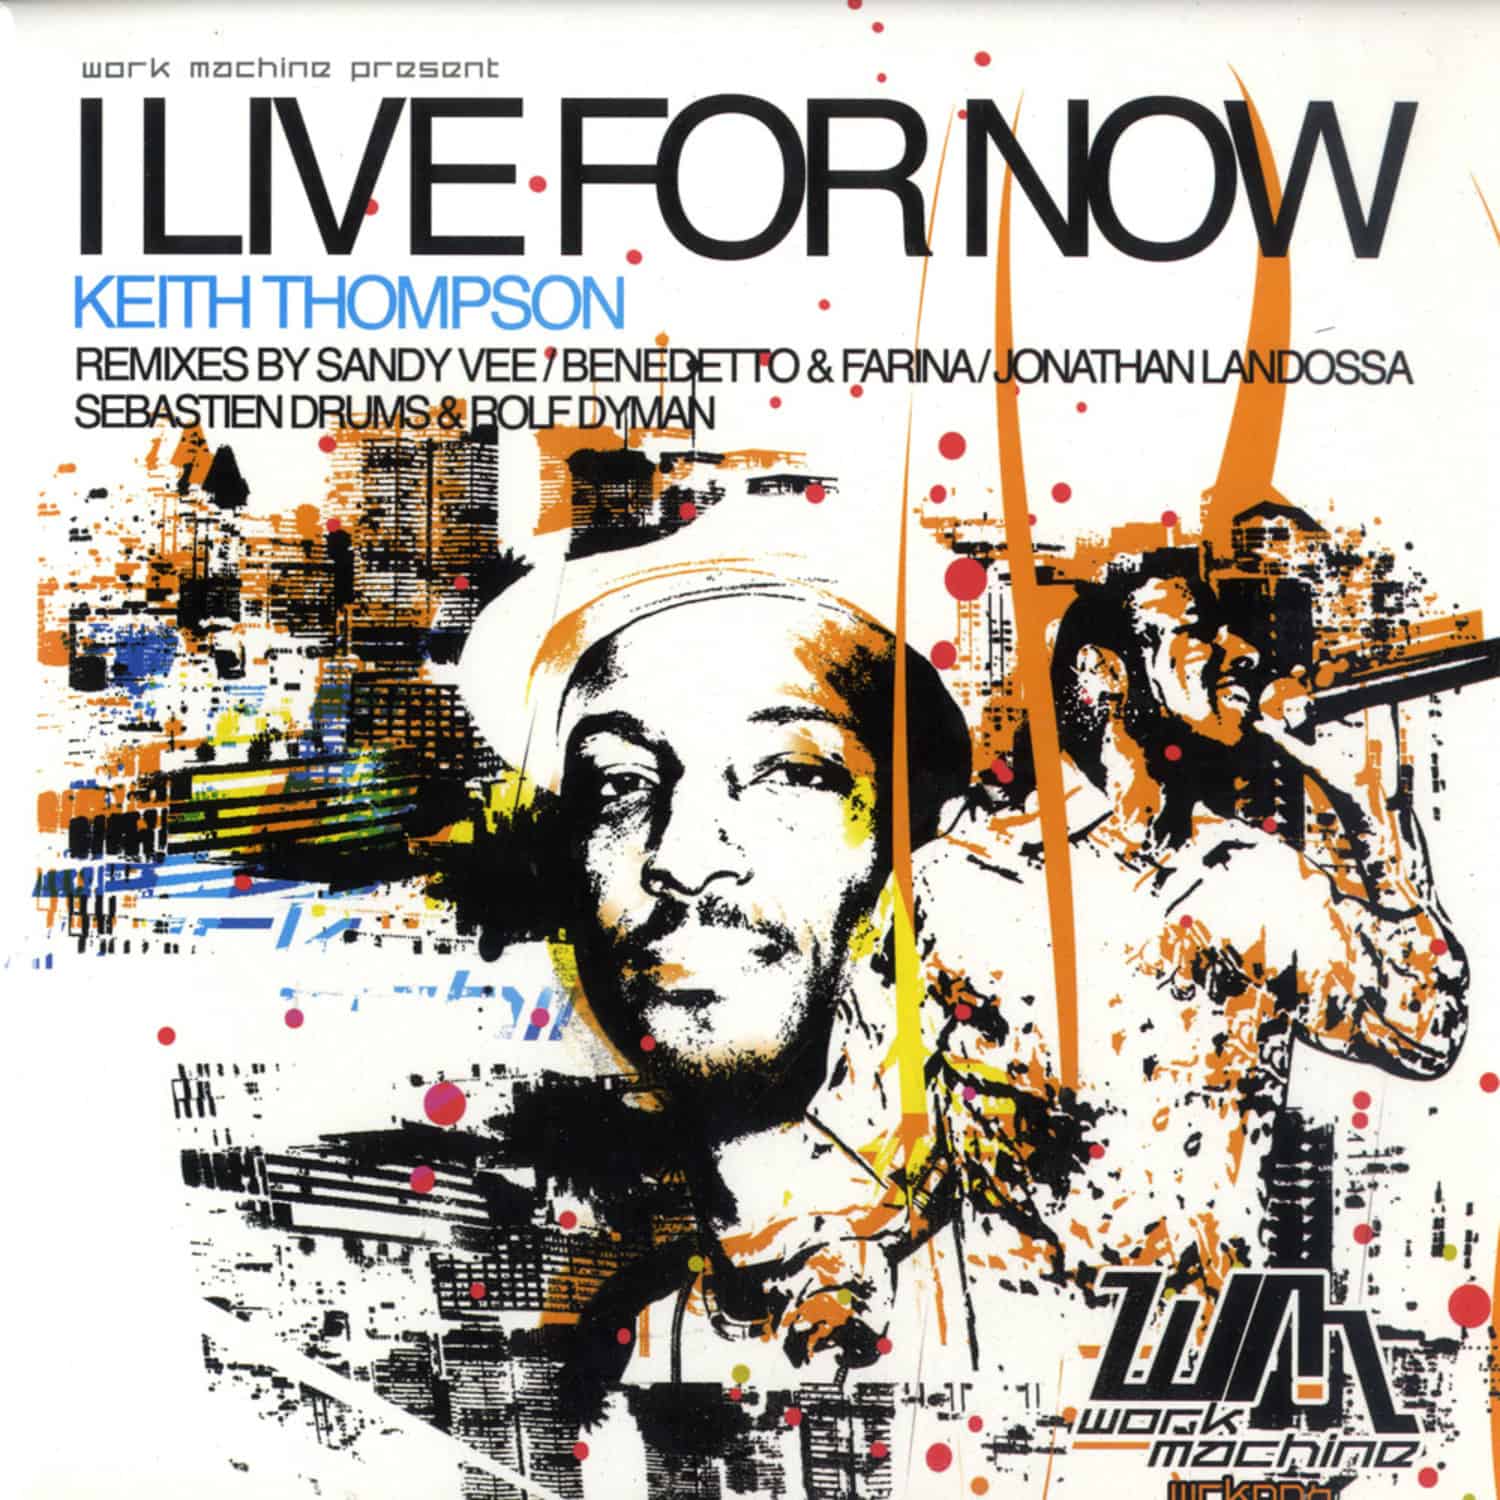 Keit Thompson - I LIVE FOR NOW